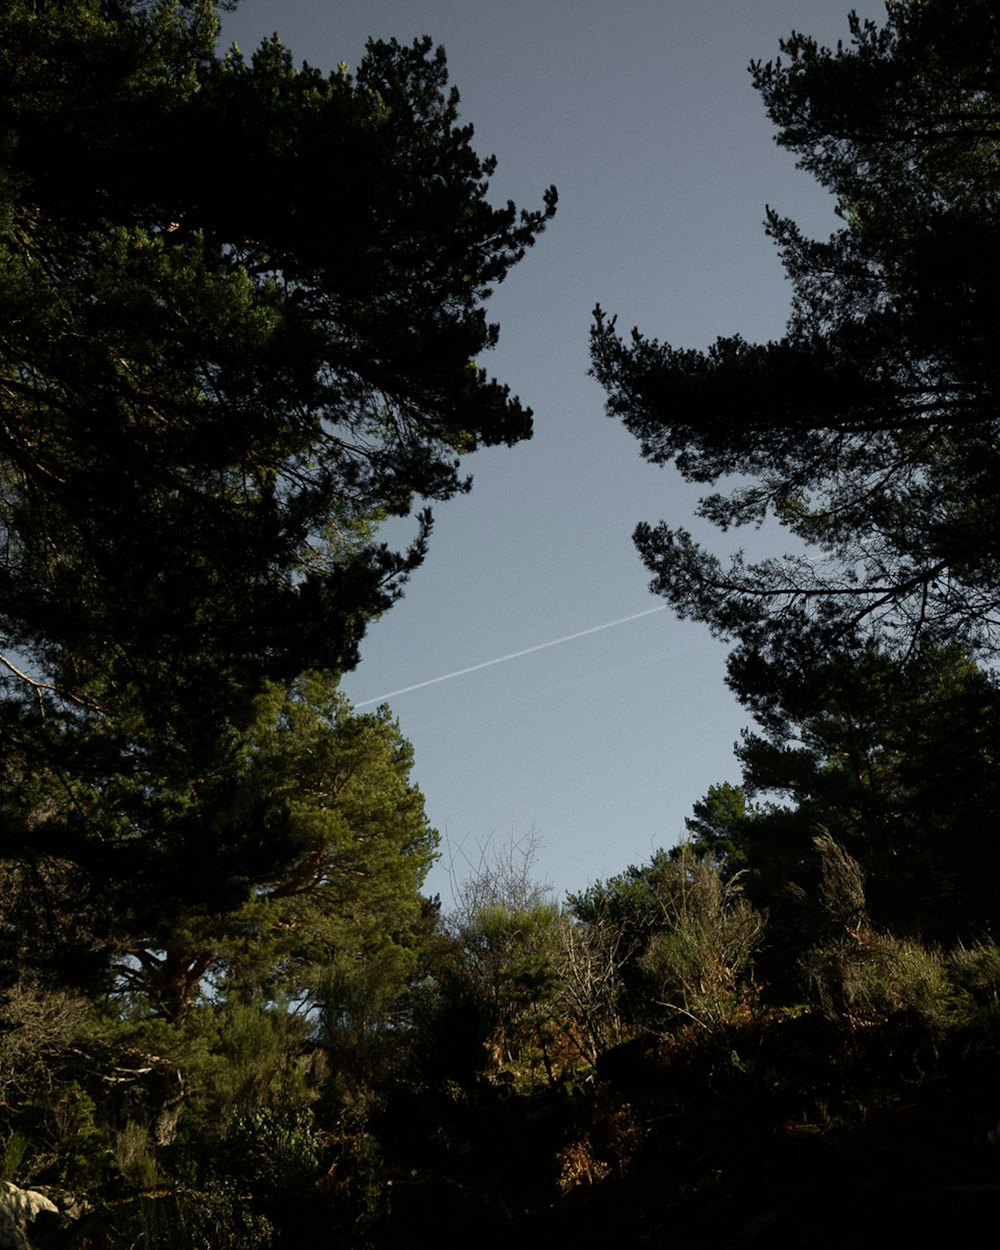 a kite flying through the air between two trees